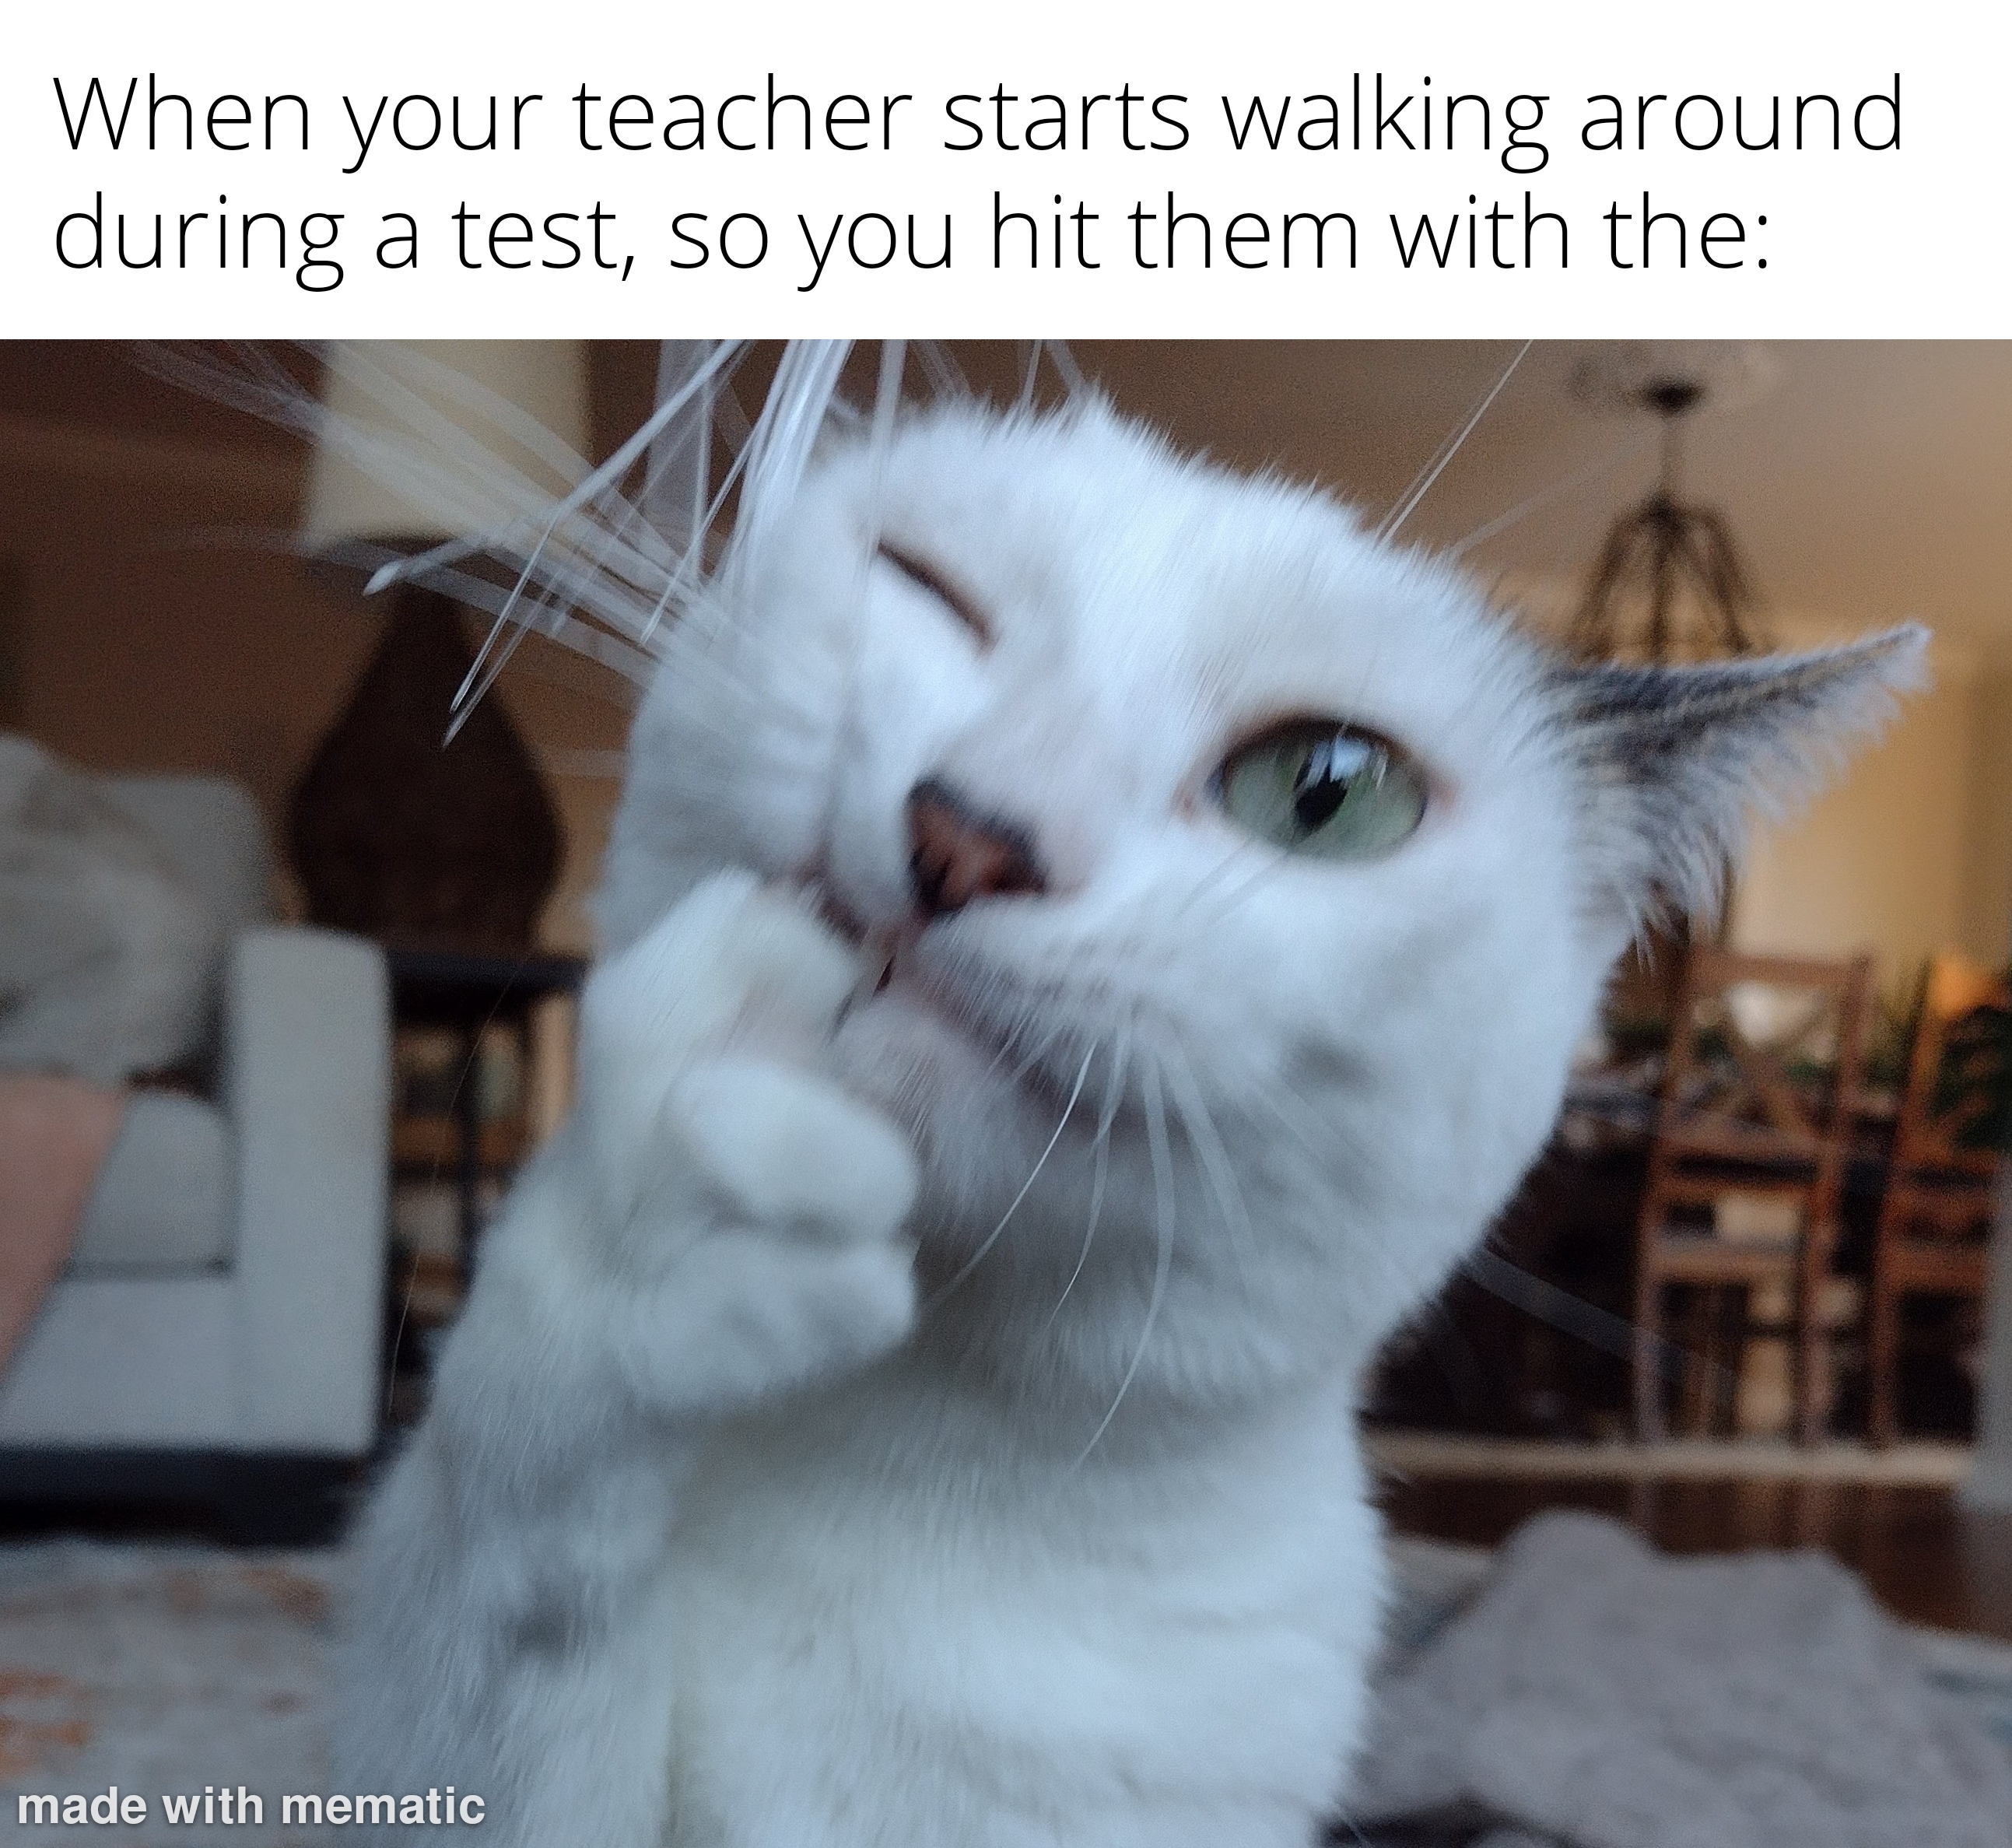 dank memes -  photo caption - When your teacher starts walking around during a test, so you hit them with the made with mematic